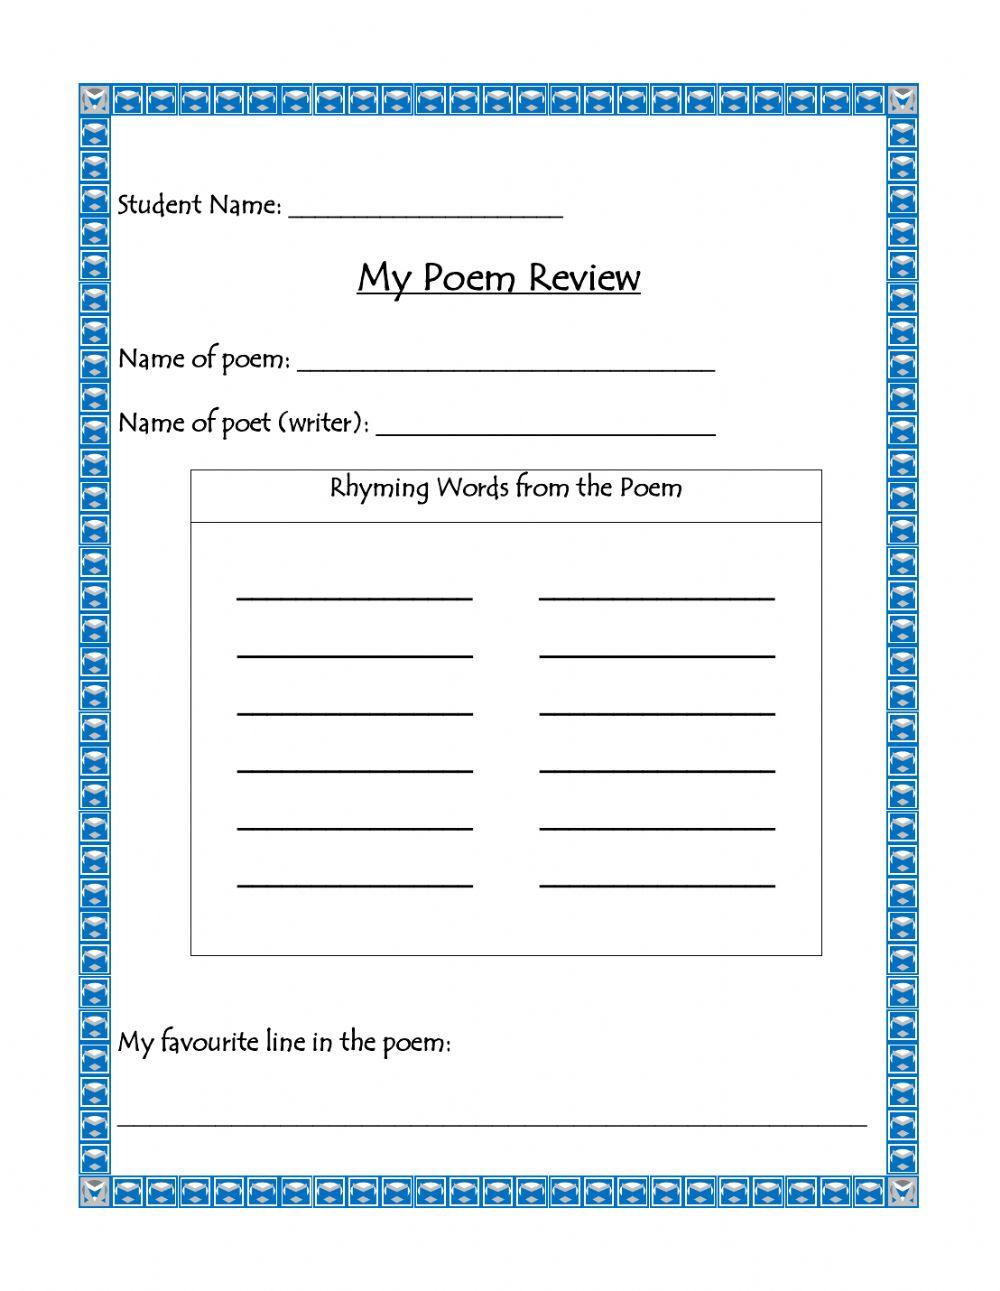 My Poem Review